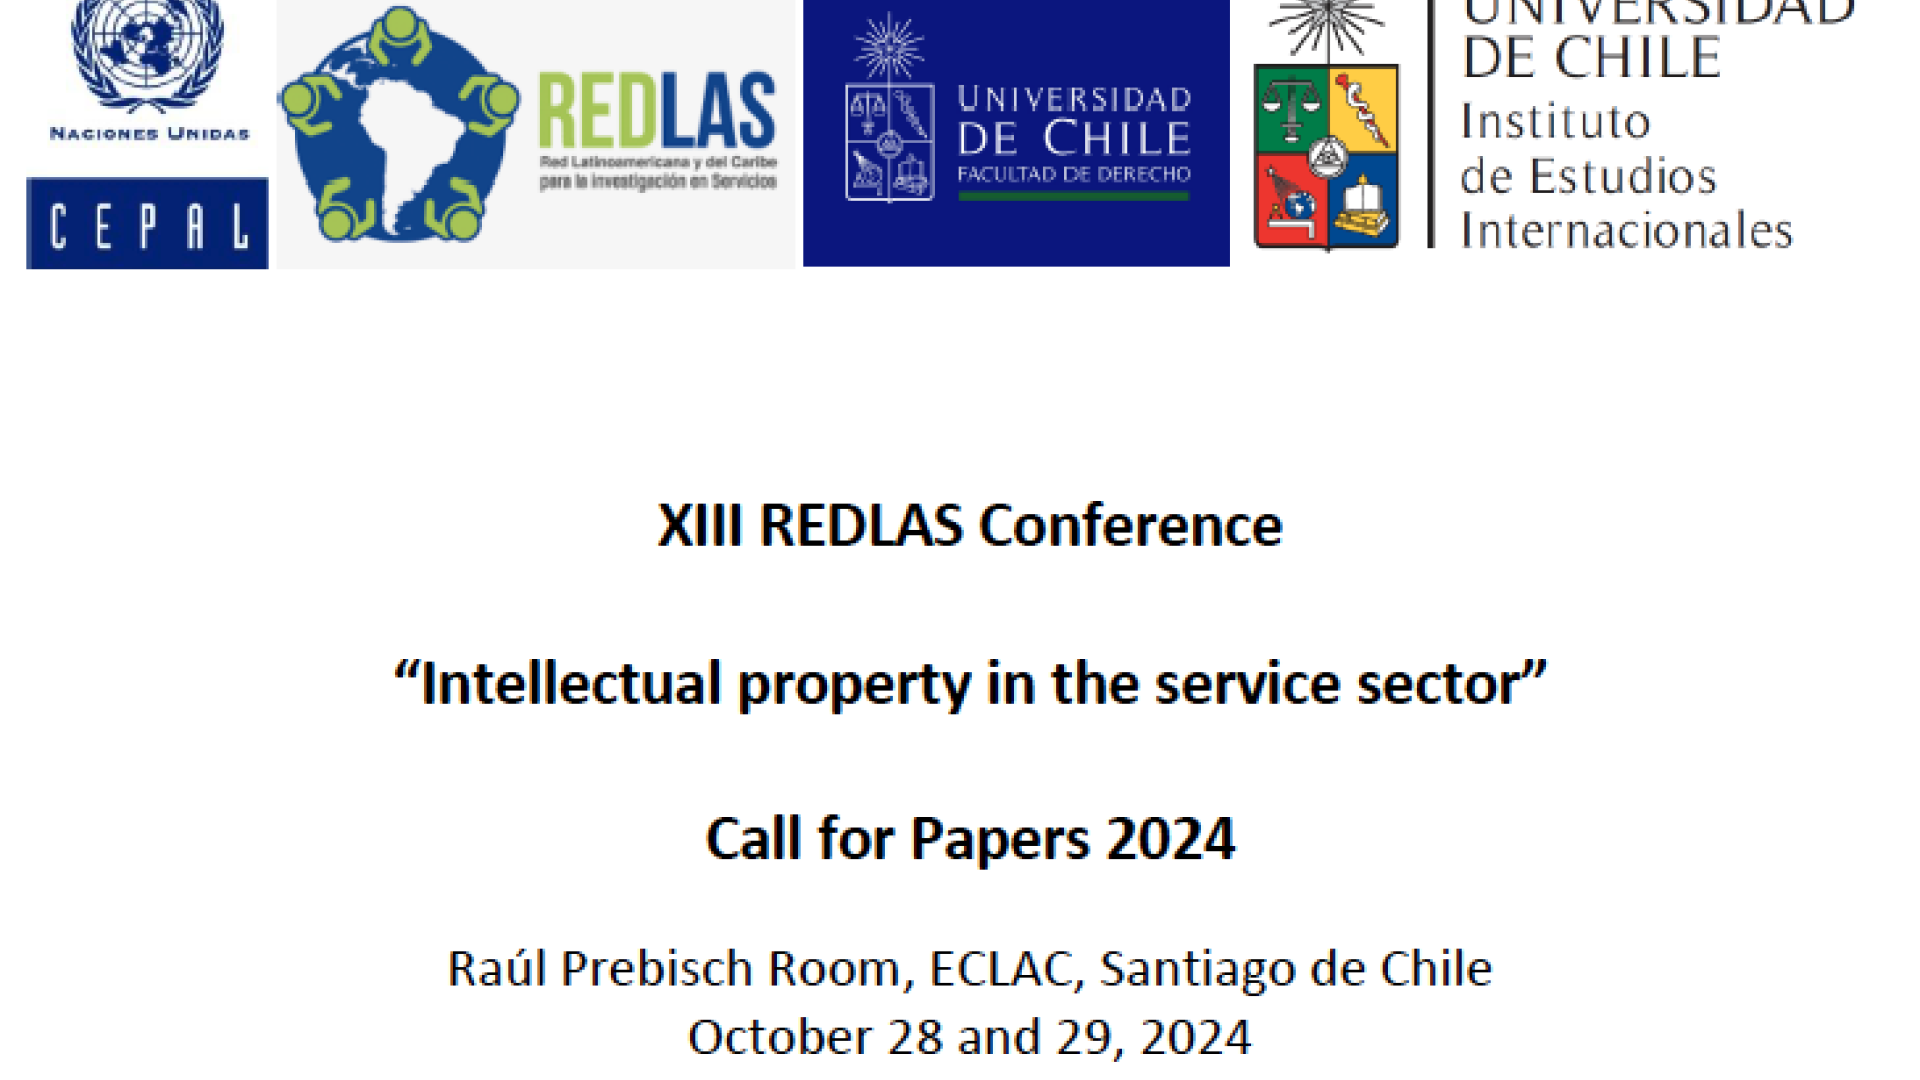 Call for papers REDLAS 2024